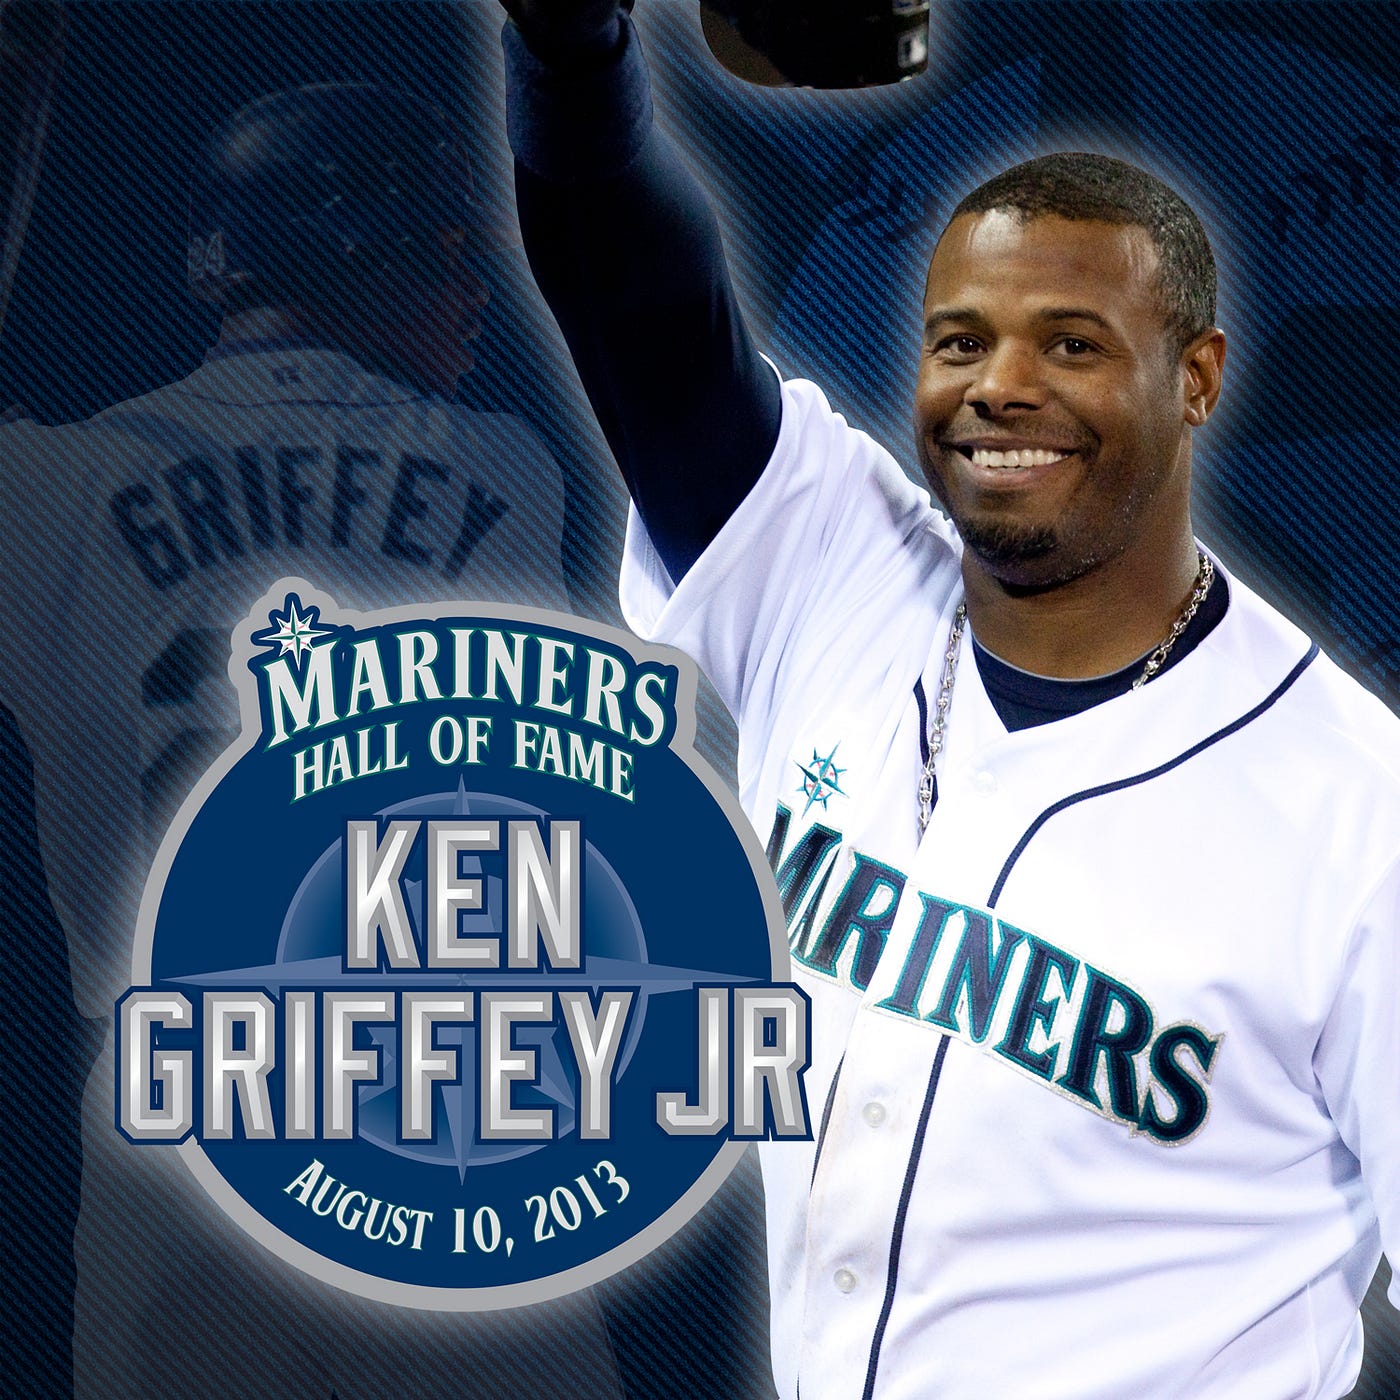 Ken Griffey Jr. To Join Mariners Hall of Fame, by Mariners PR